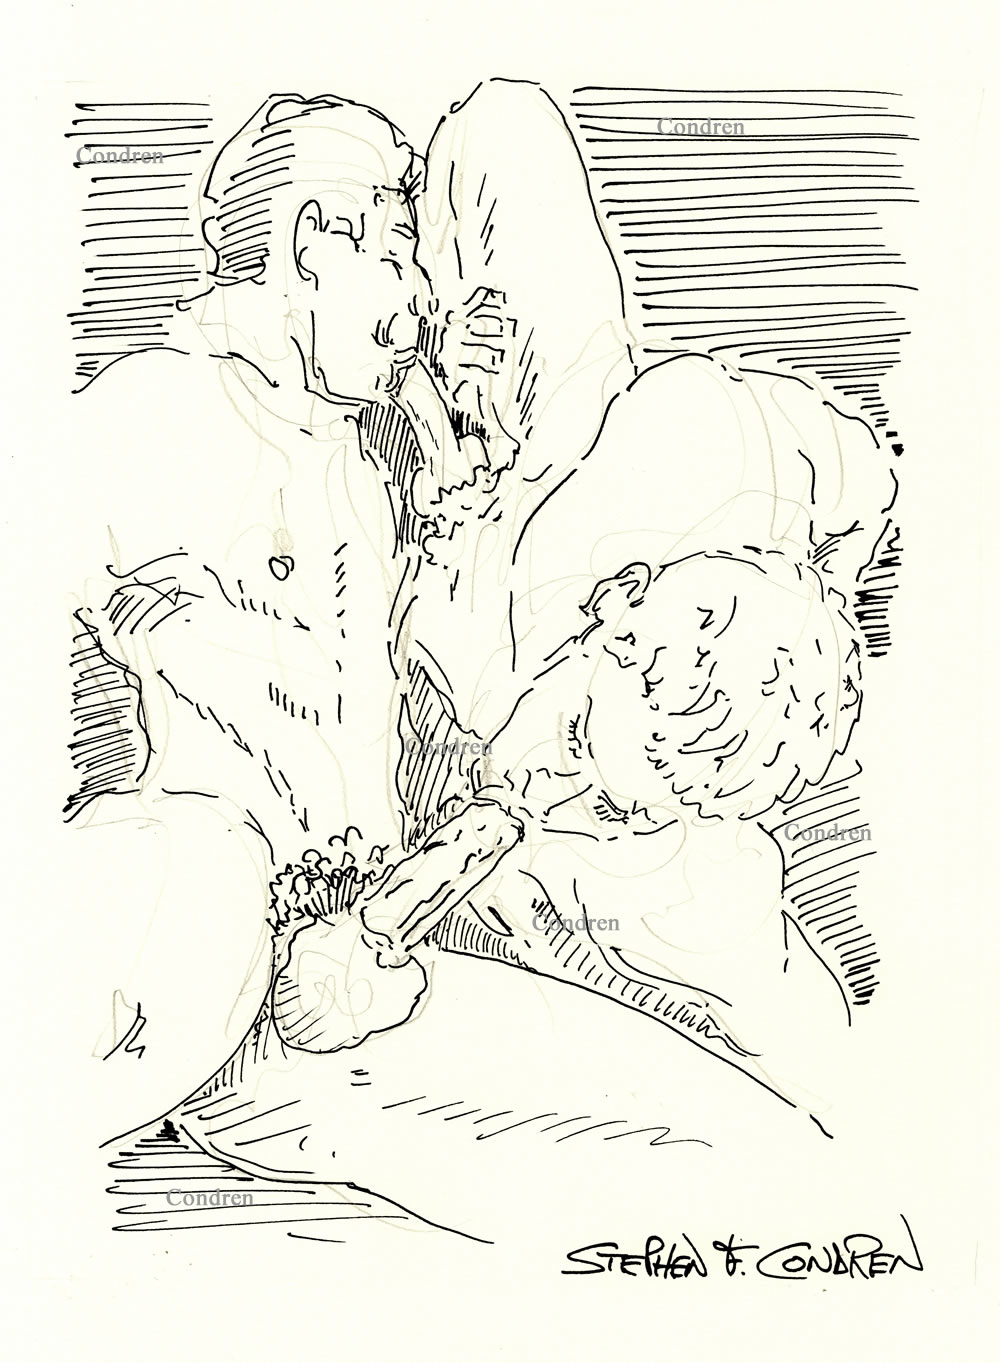 Pen & ink figure drawing of two boys performing 69 sex. Cock suckers have muscular bodies and a chiseled 6-pack set of abs.